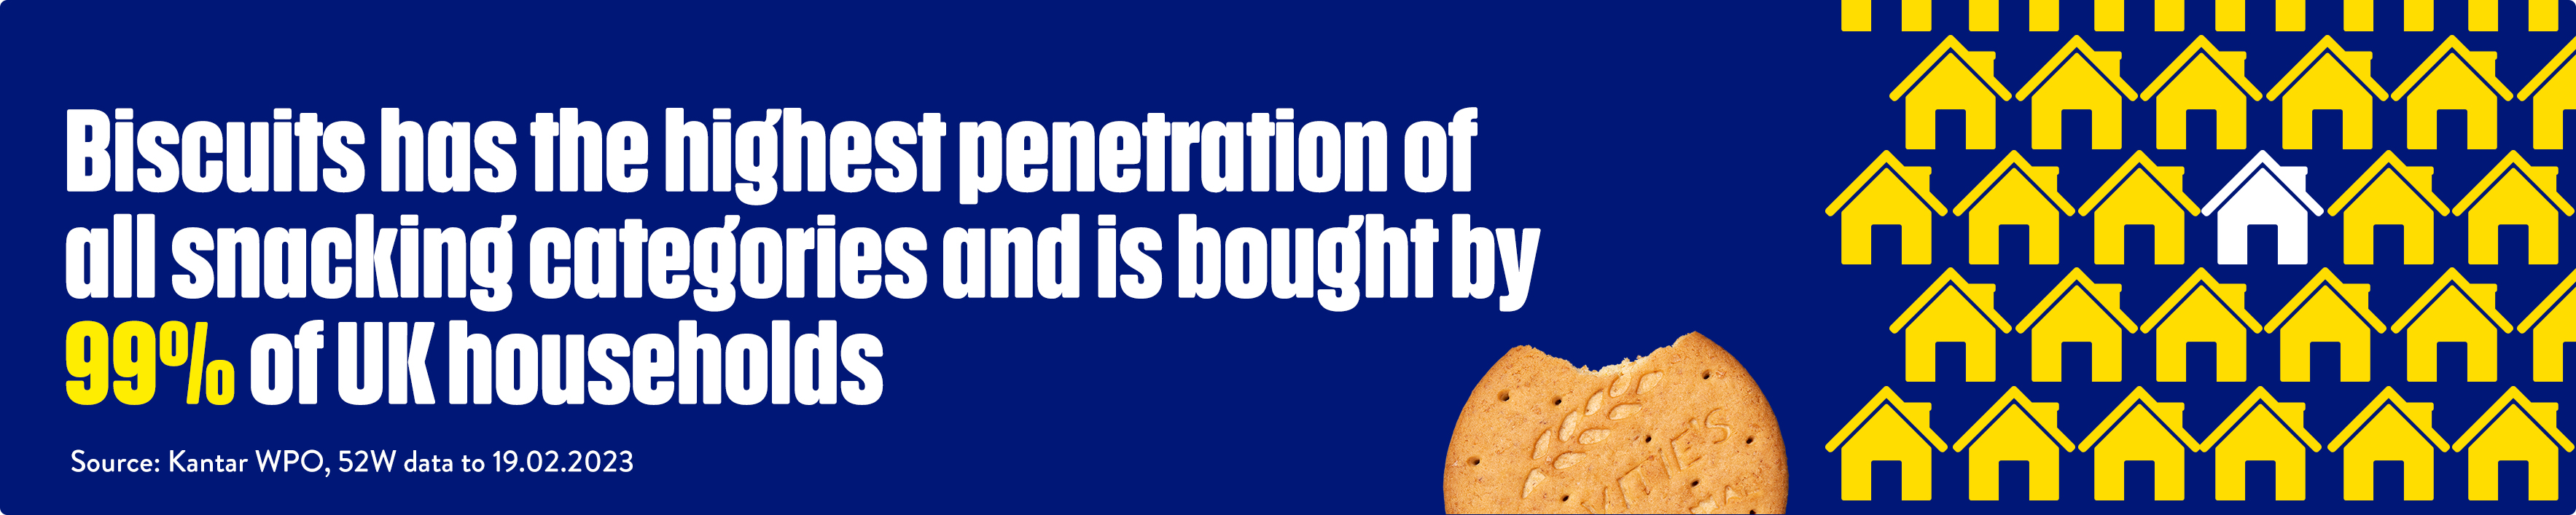 Biscuits has the highest penetration of all snacking categories